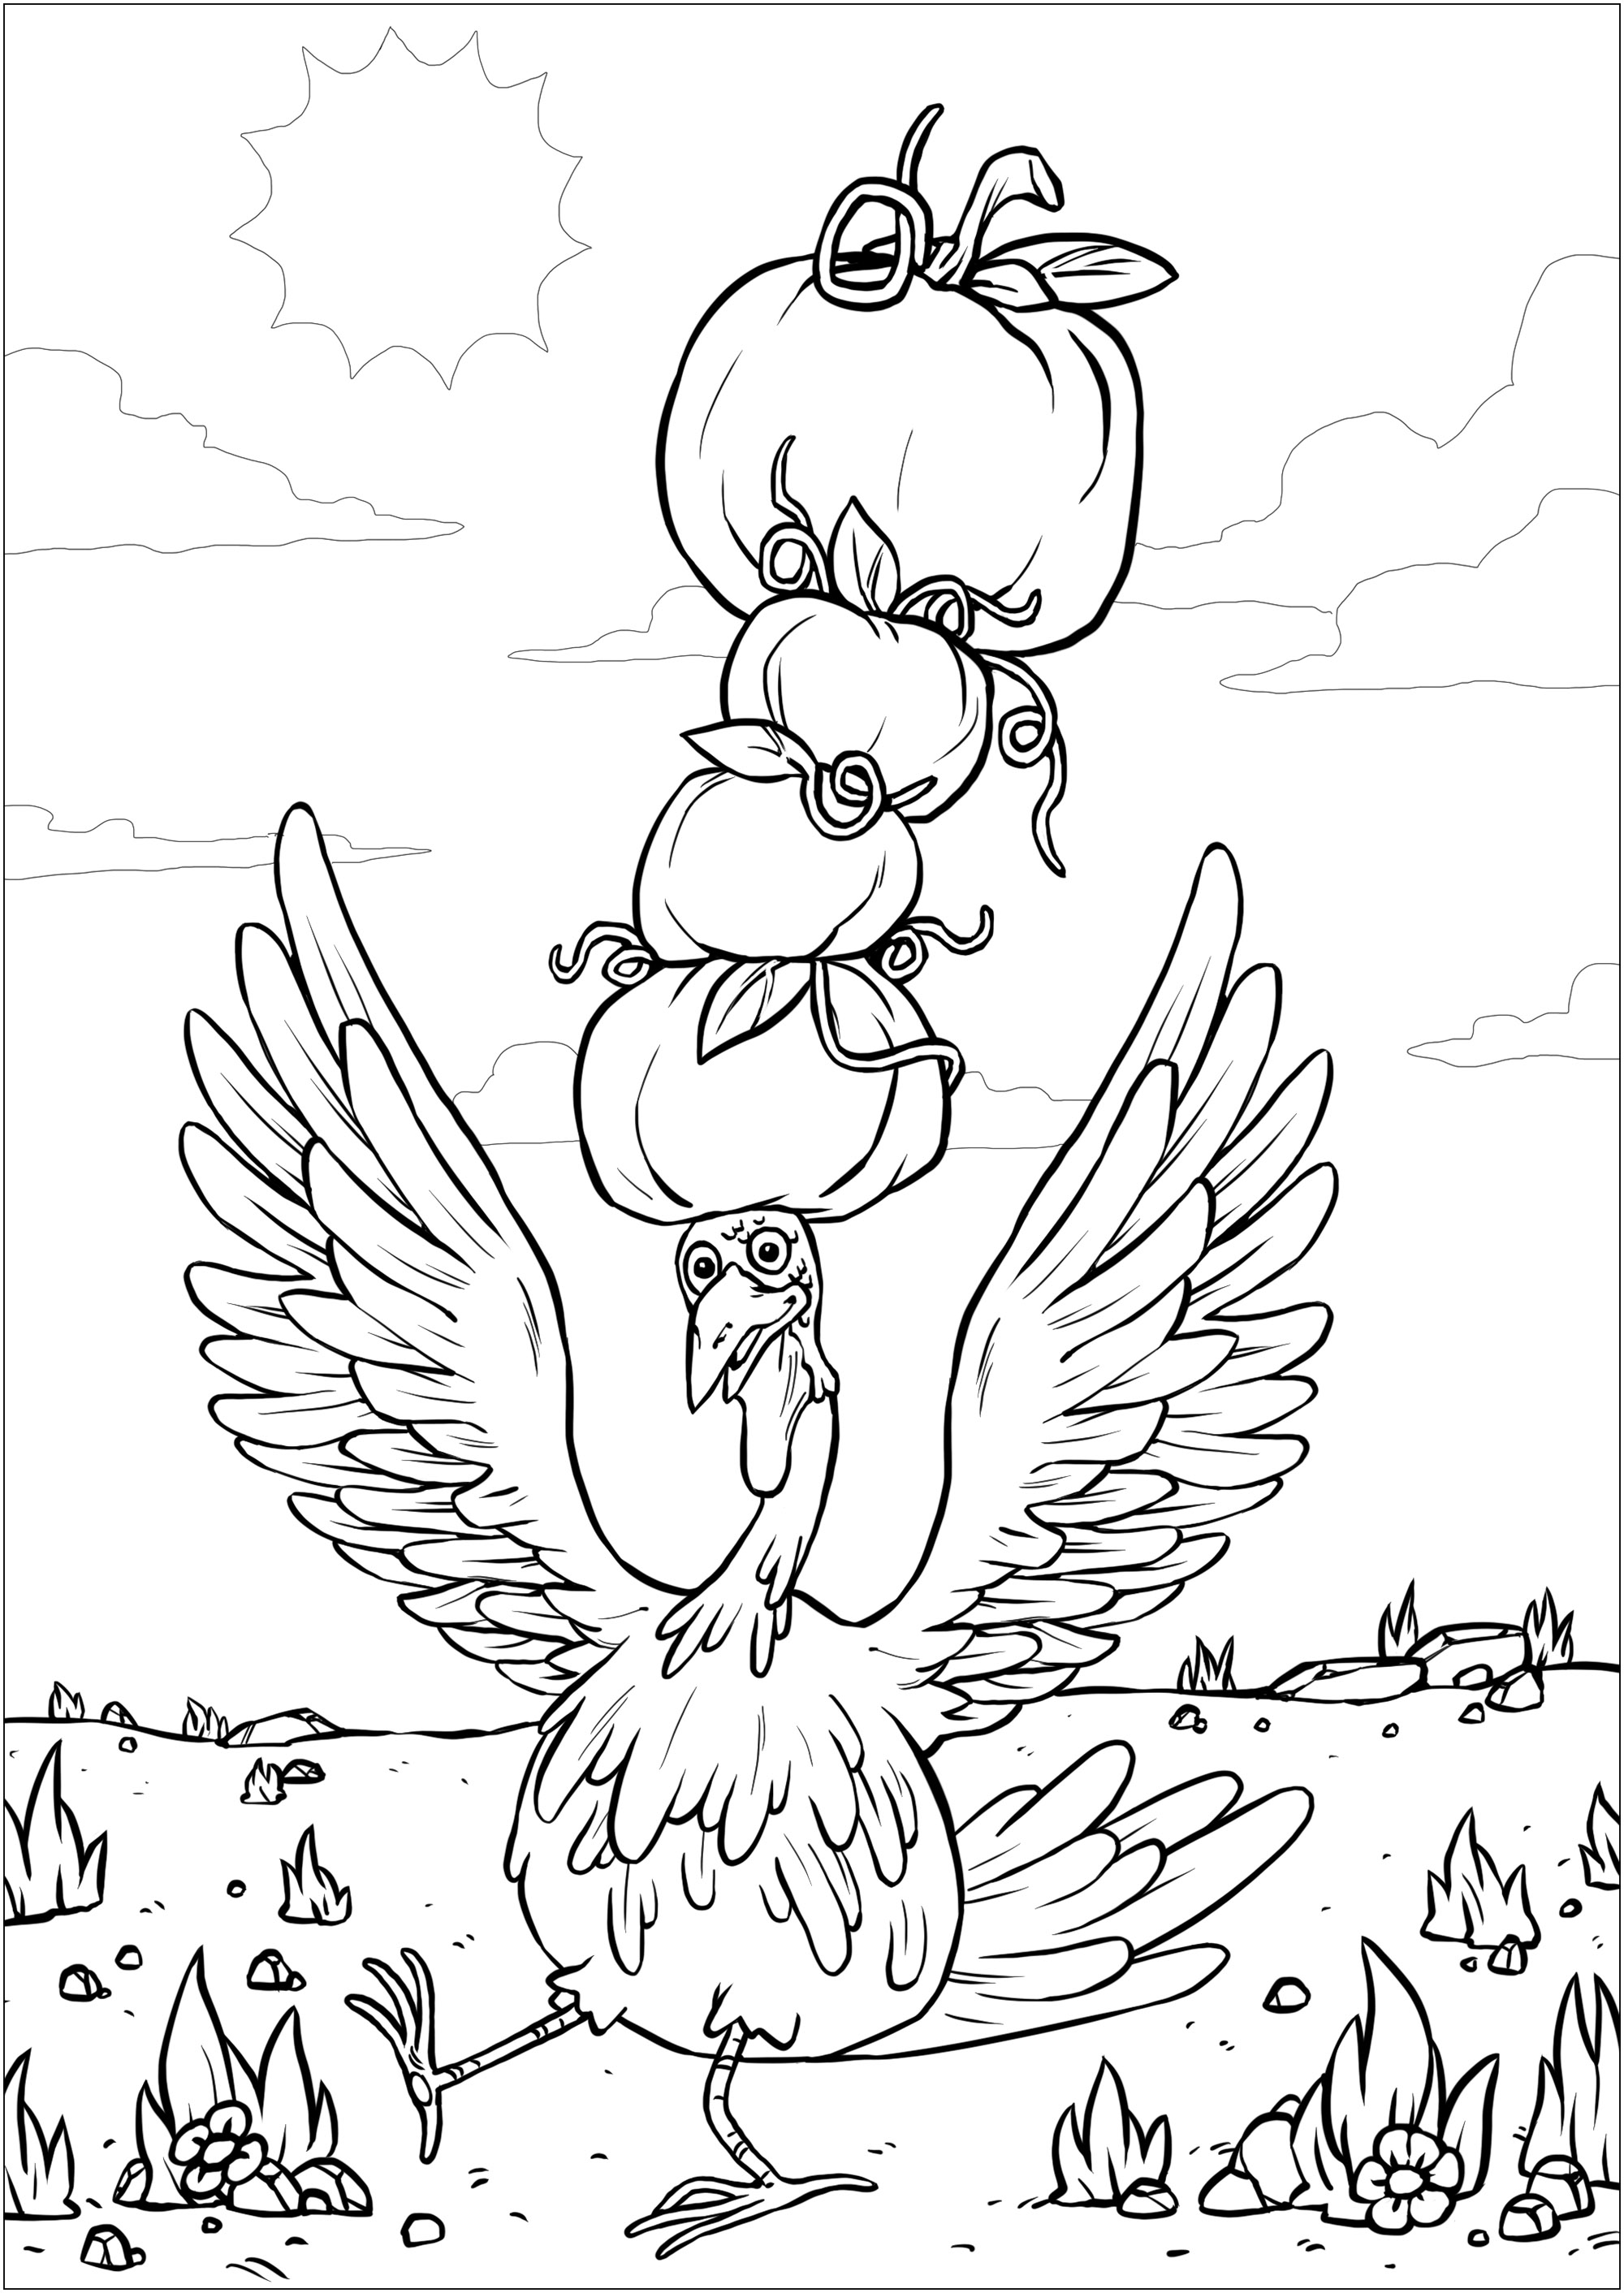 Thanksgiving free to color for kids - Thanksgiving Kids Coloring Pages